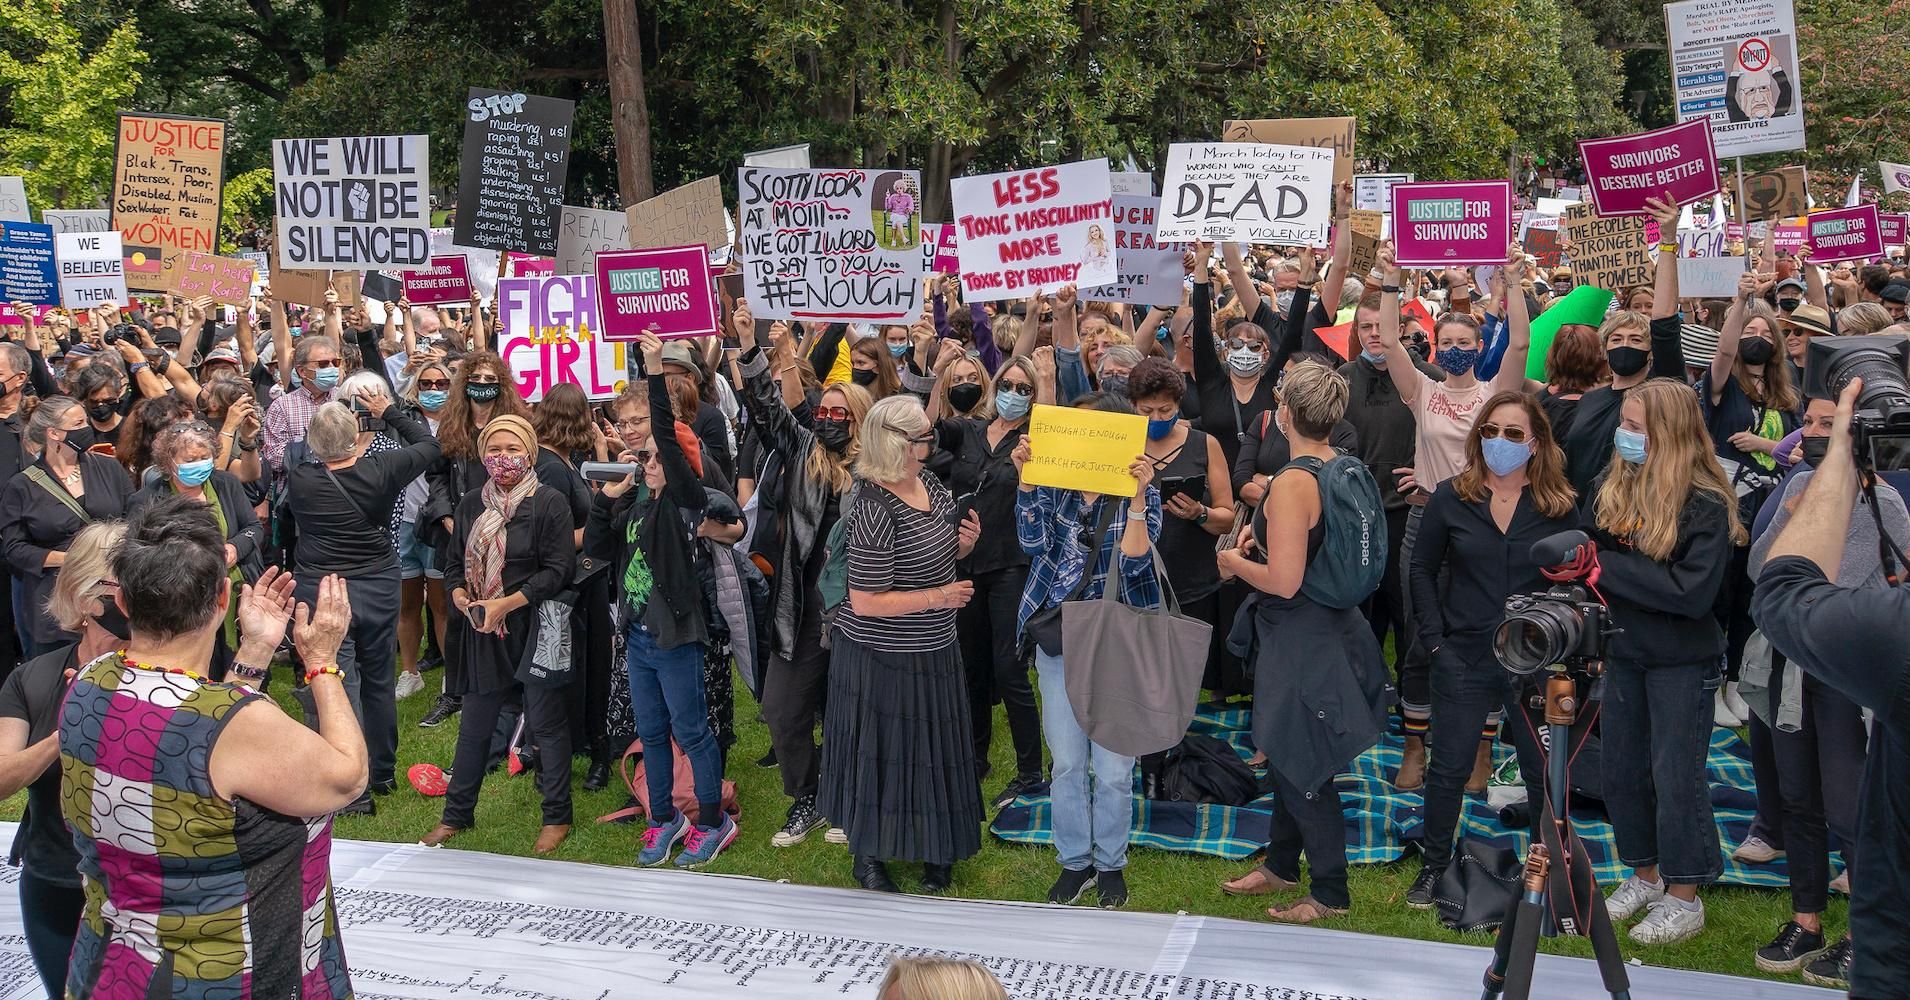 Protesters rally against sexual violence and gender discrimination on March 15, 2021 in Melbourne, Australia. (Photo: Matt Hrkac/Flickr/cc)